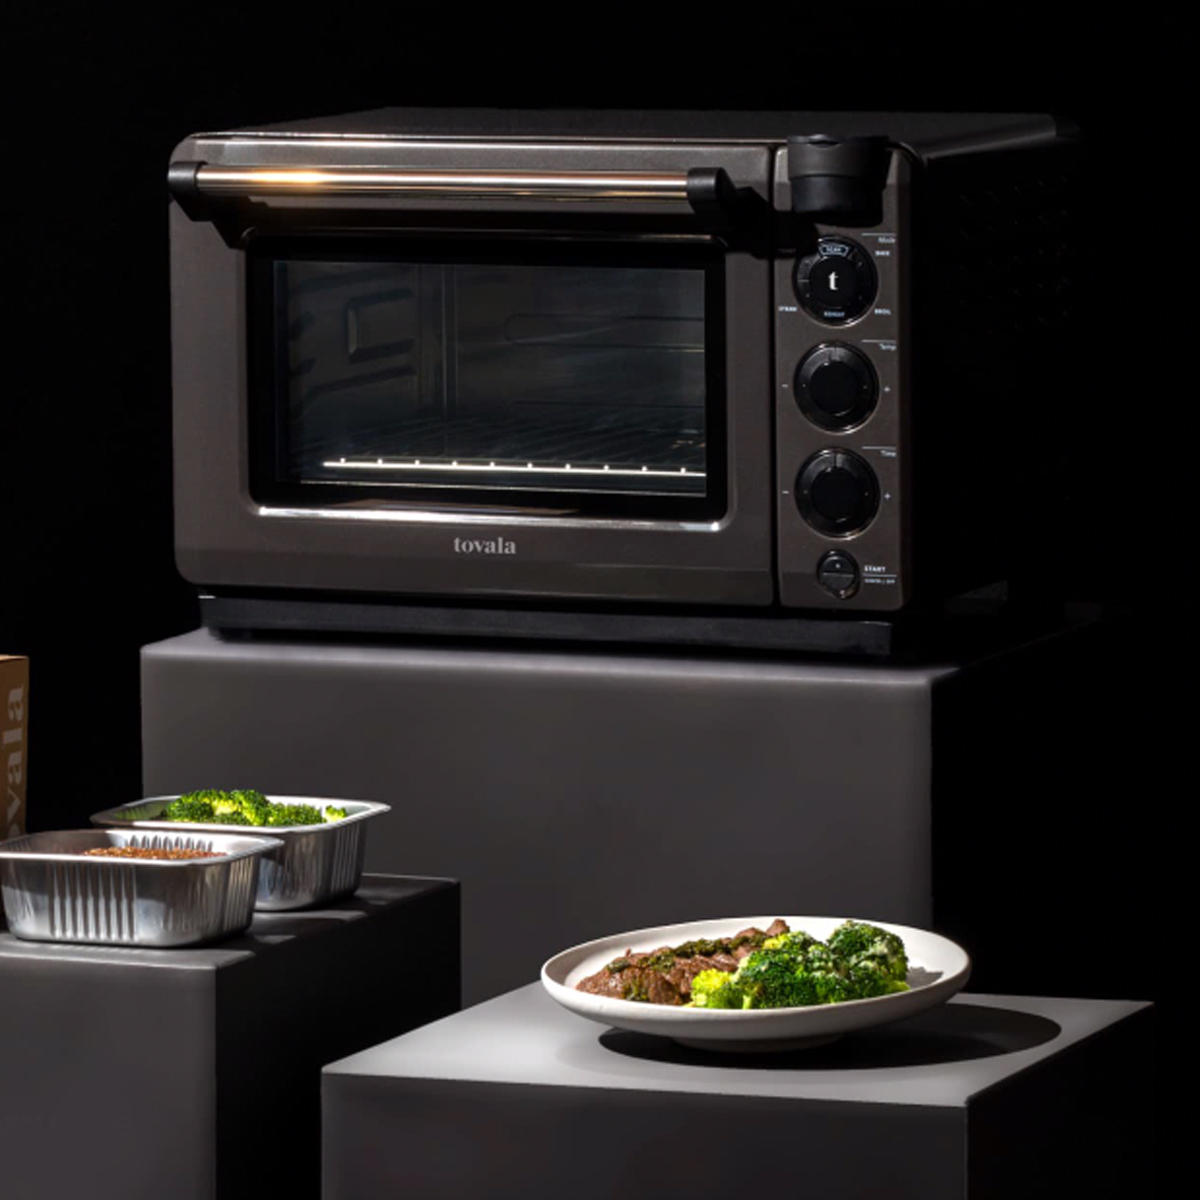 New Smart Oven From Tovala: How It Works